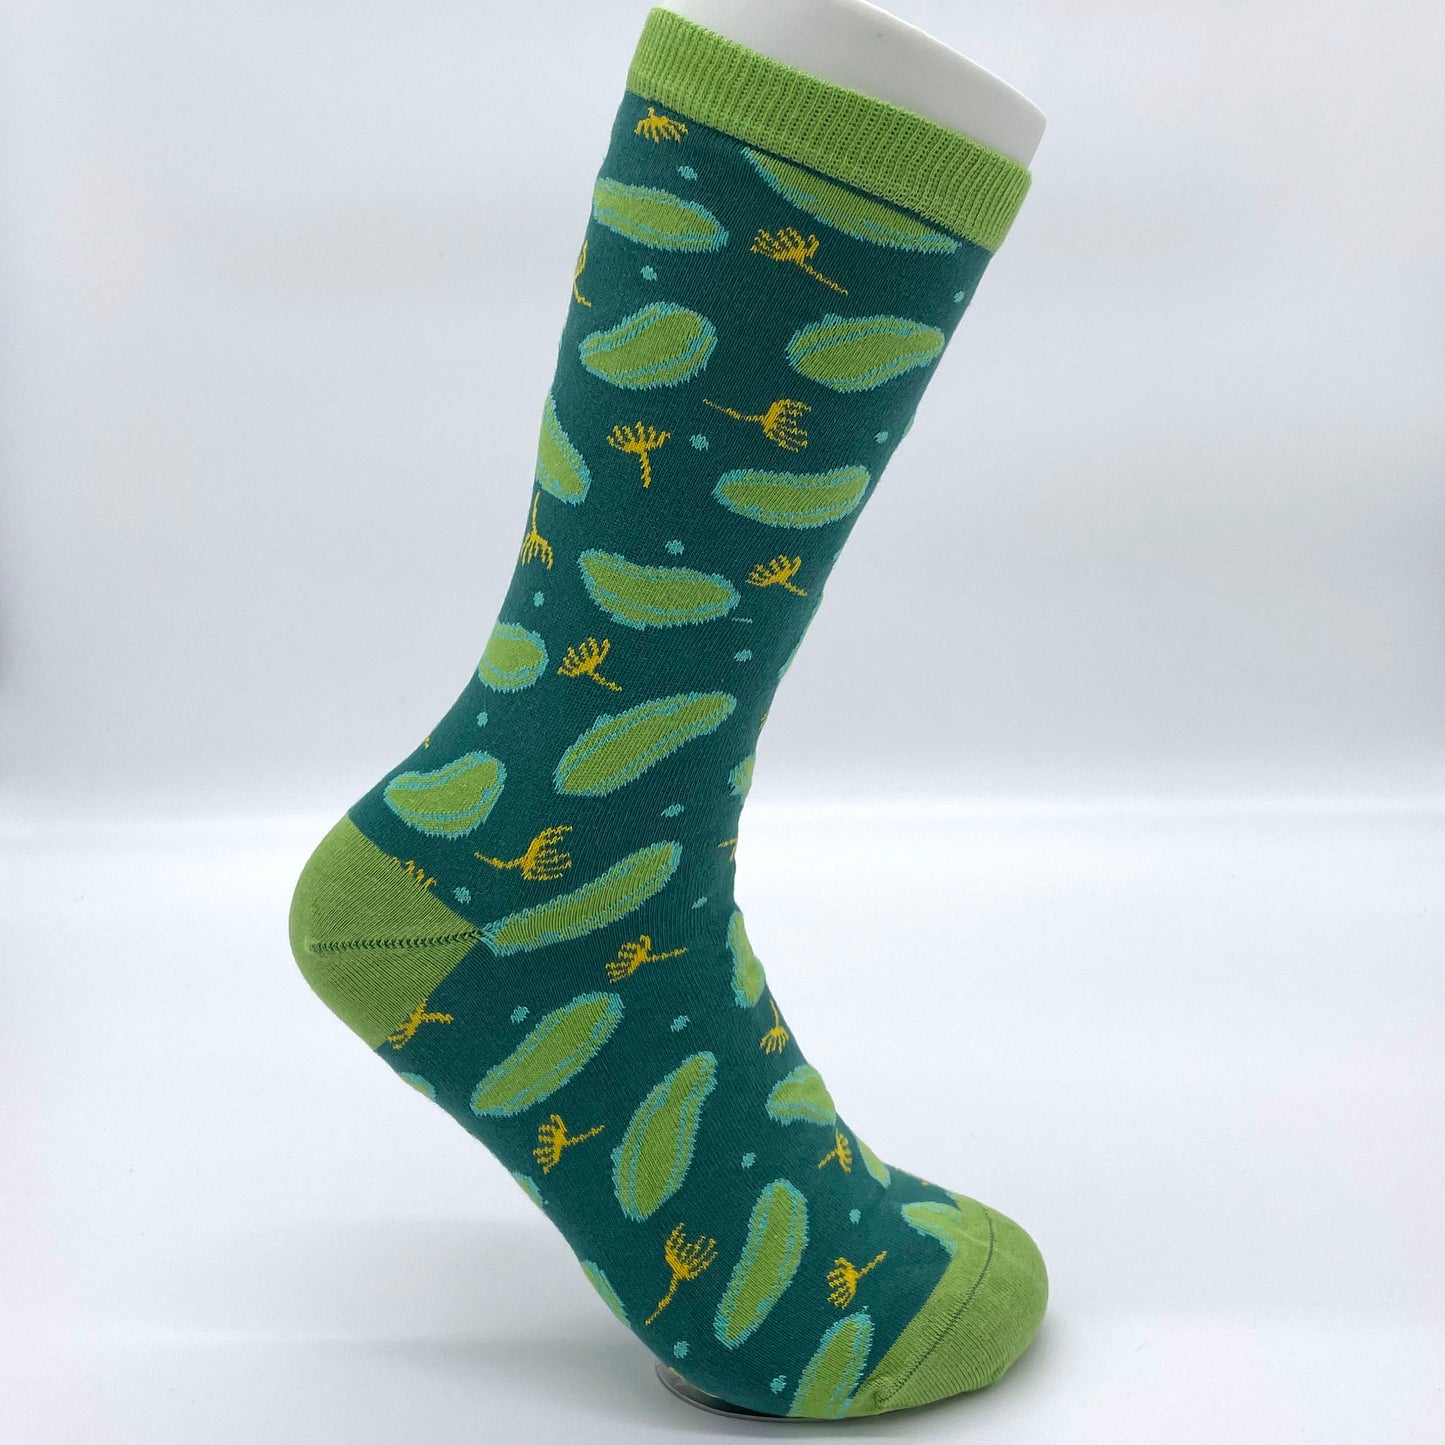 A white sock mannequin sports a dill pickle-patterned green sock. The welt, heel and toe are all light green.